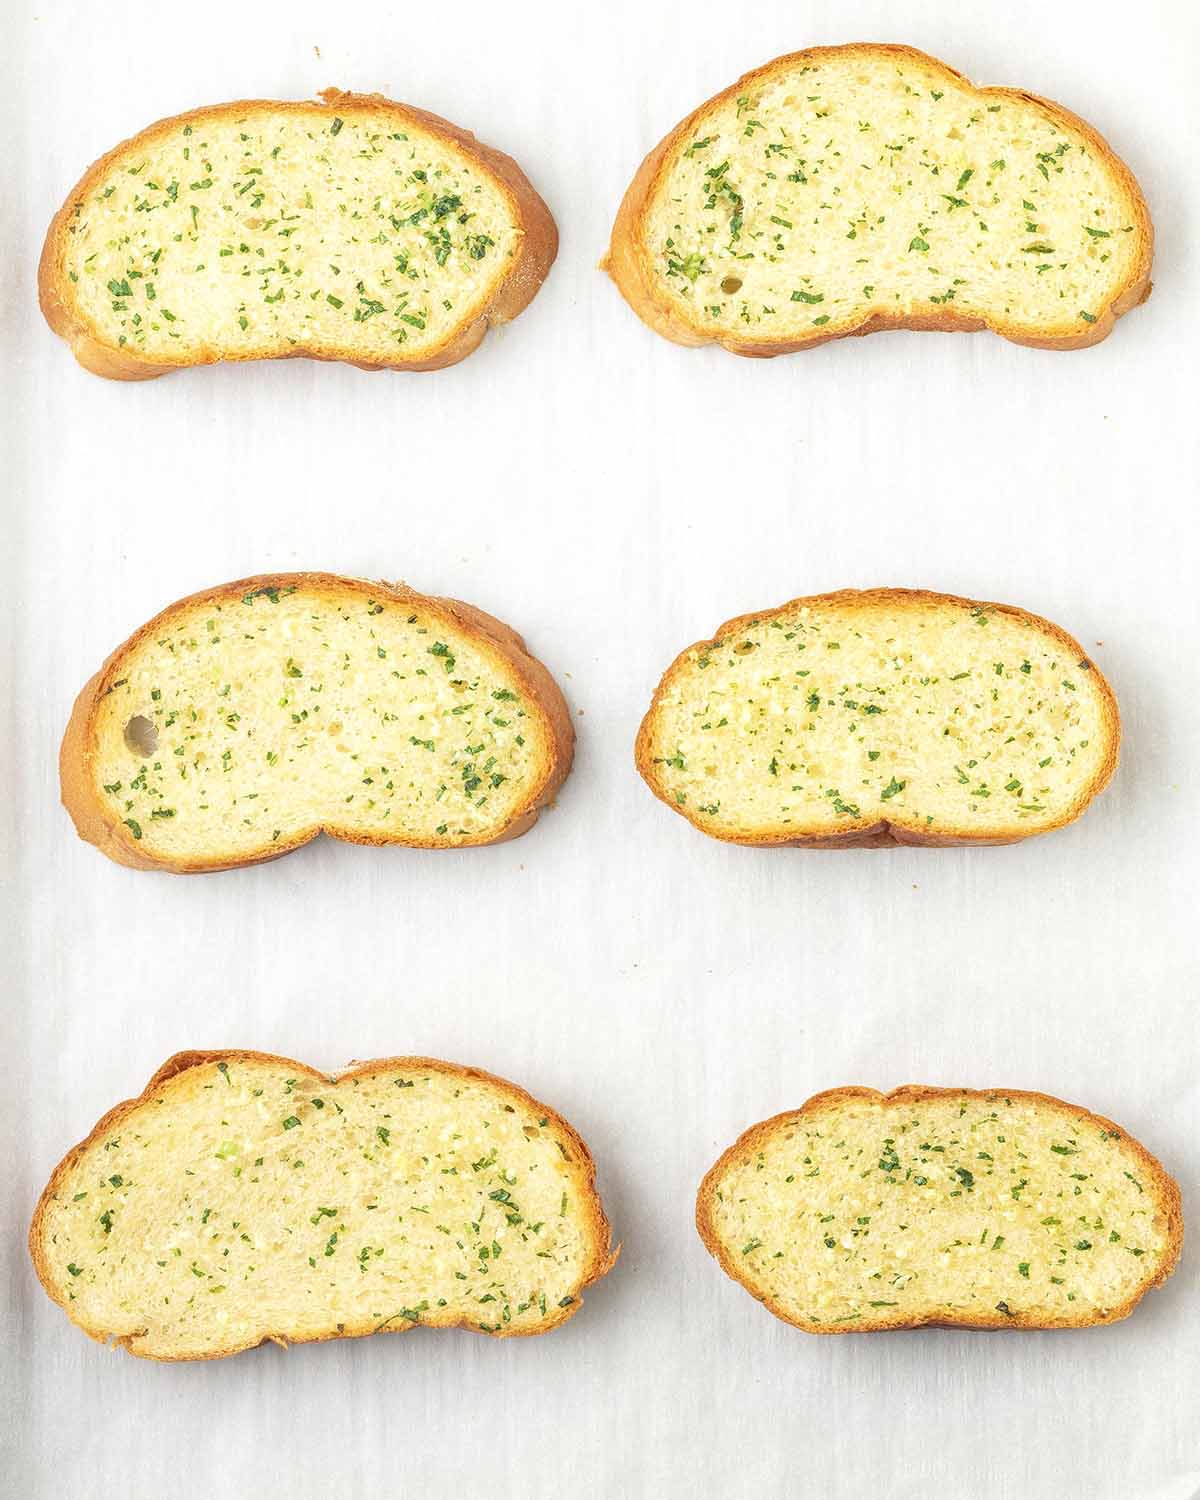 An overhead image showing six slices of freshly baked garlic bread on a parchment lined baking pan.